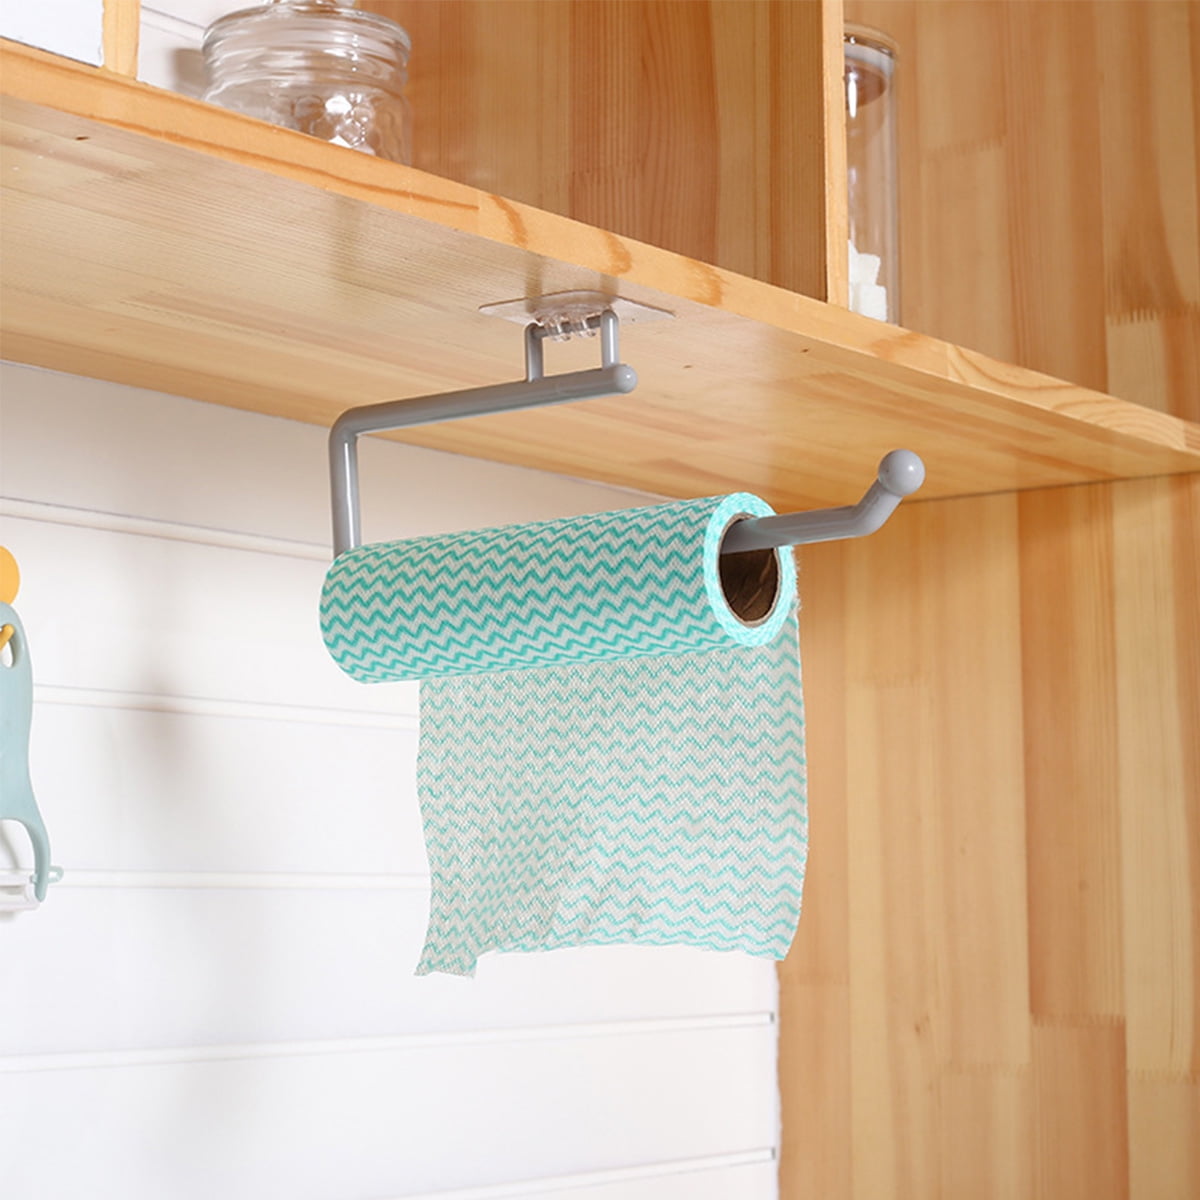 Real Solutions for Real Life Under Cabinet Paper Towel Holder RS-PTHWIDE-W  - The Home Depot